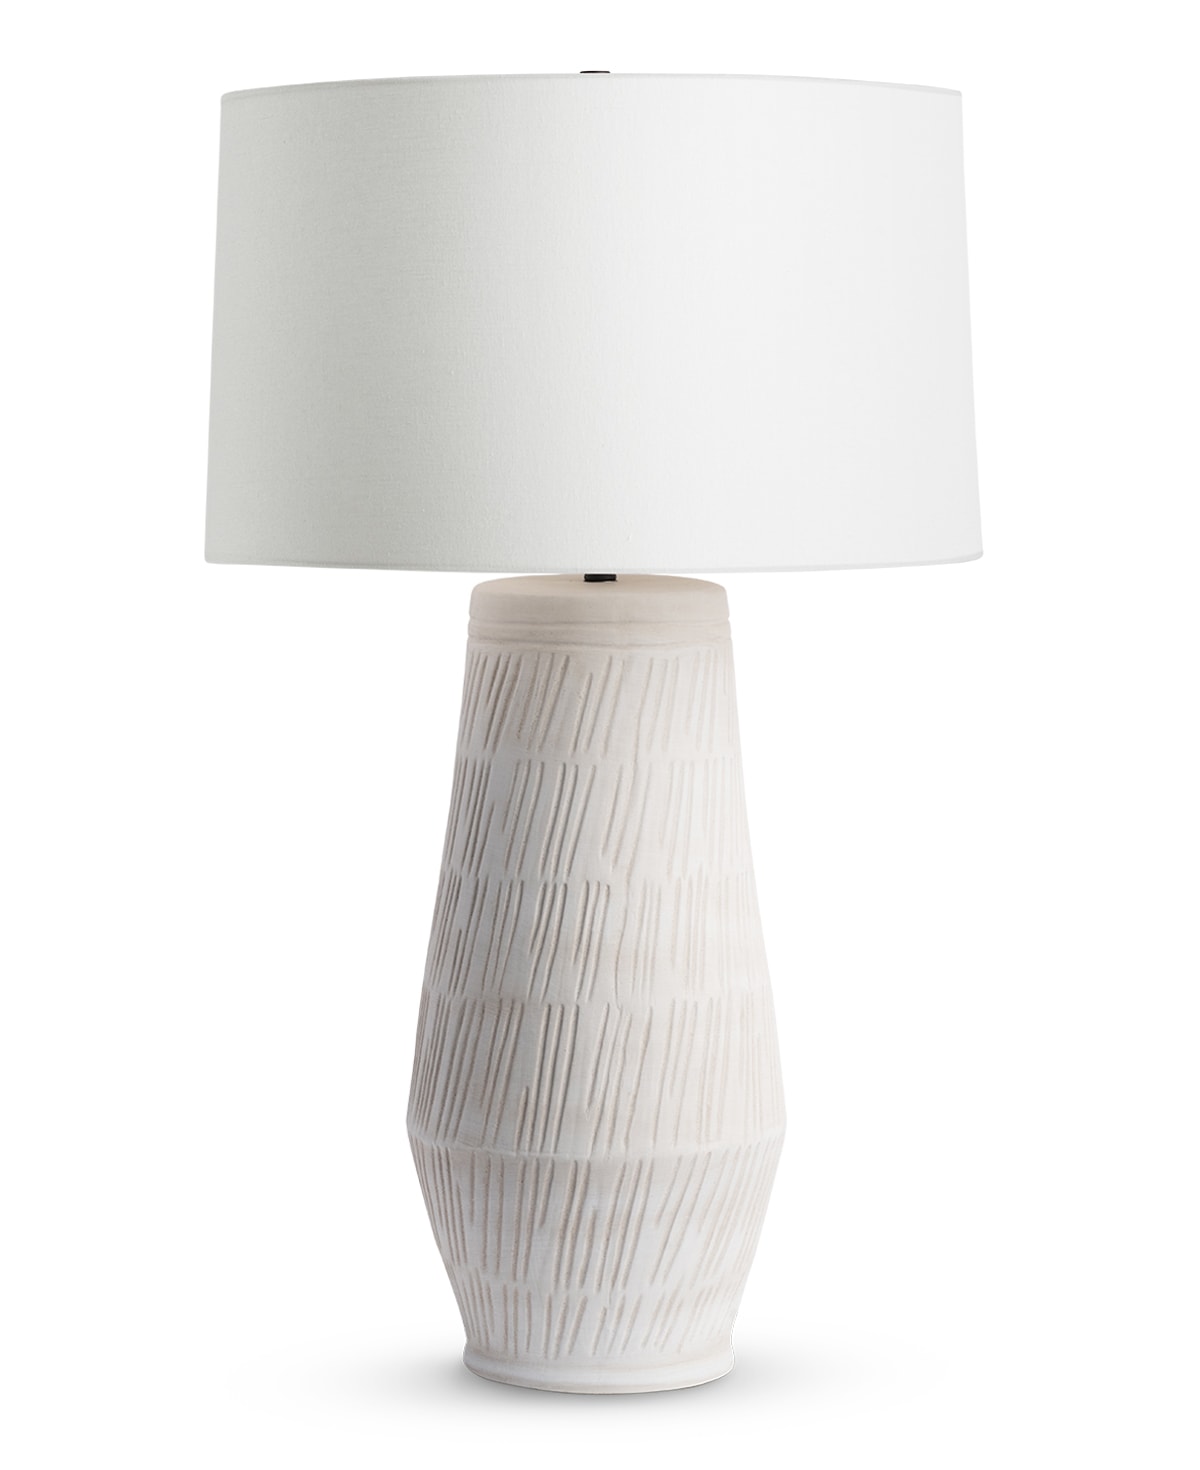 FlowDecor Alden Table Lamp in ceramic with cream finish and off-white linen tapered drum shade (# 4585)